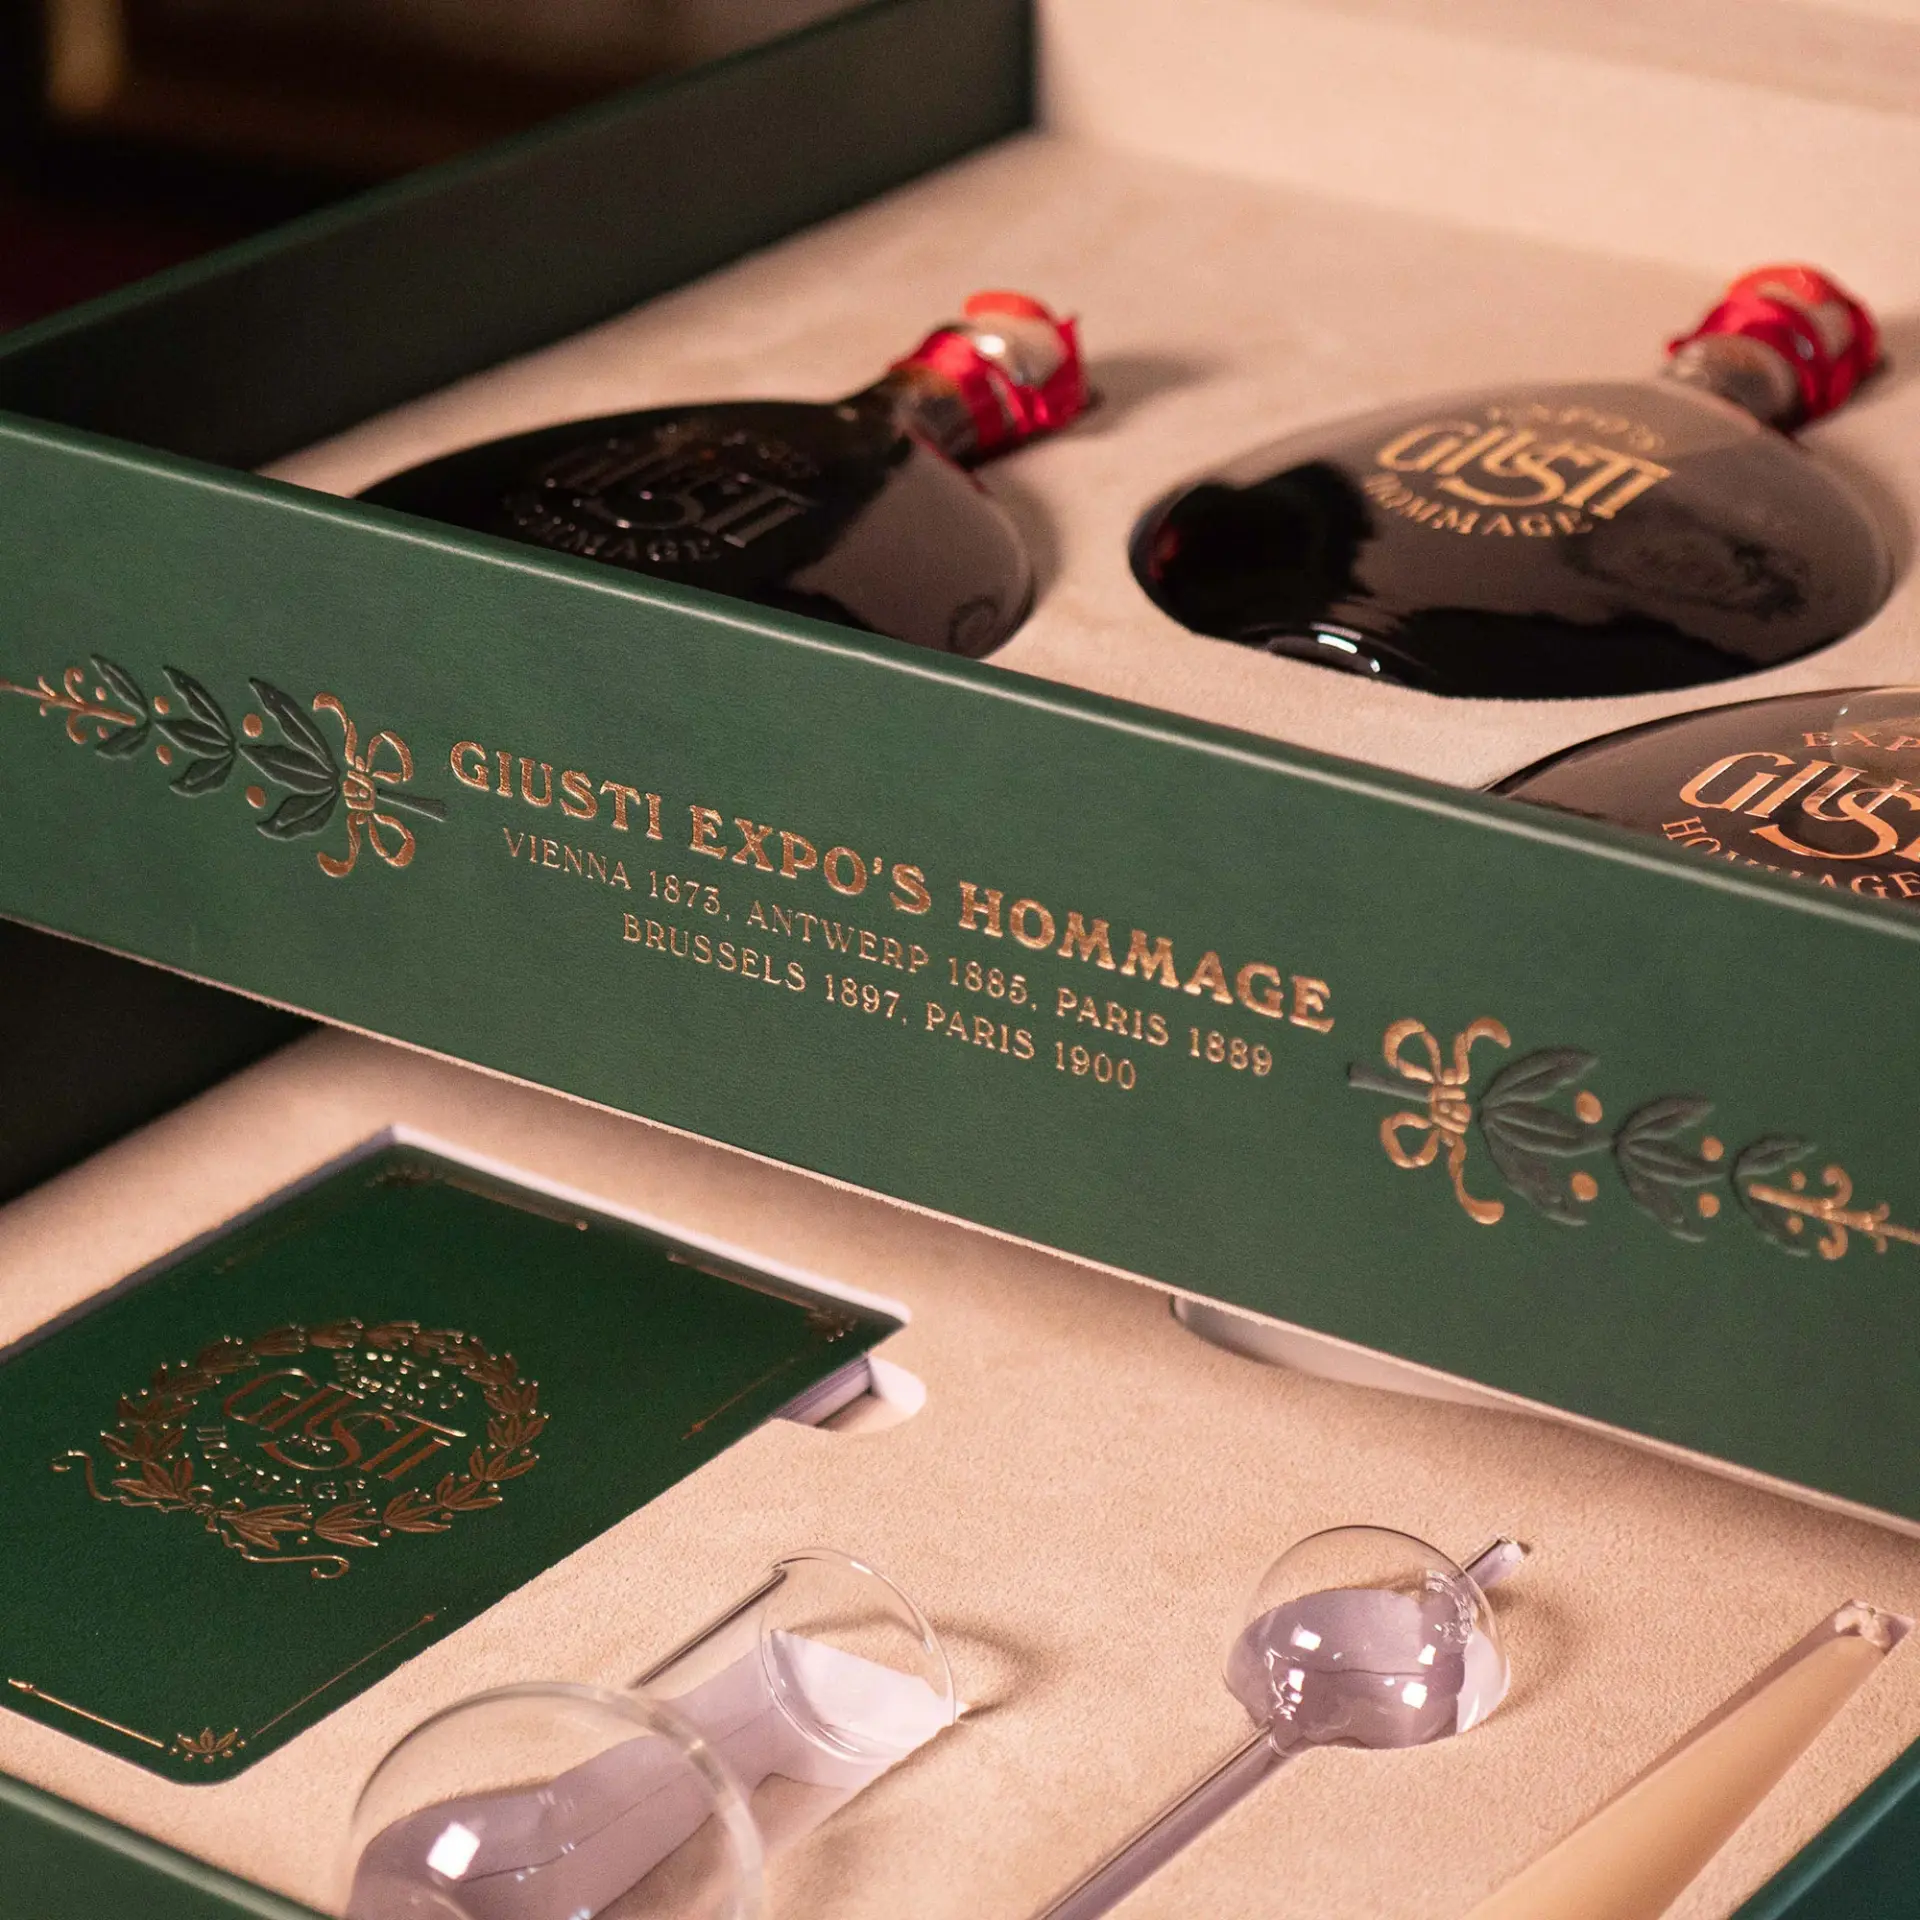 Giuseppe Giusti Expo's Hommage - A Rare and Exclusive Giusti Reserve Limited Edition